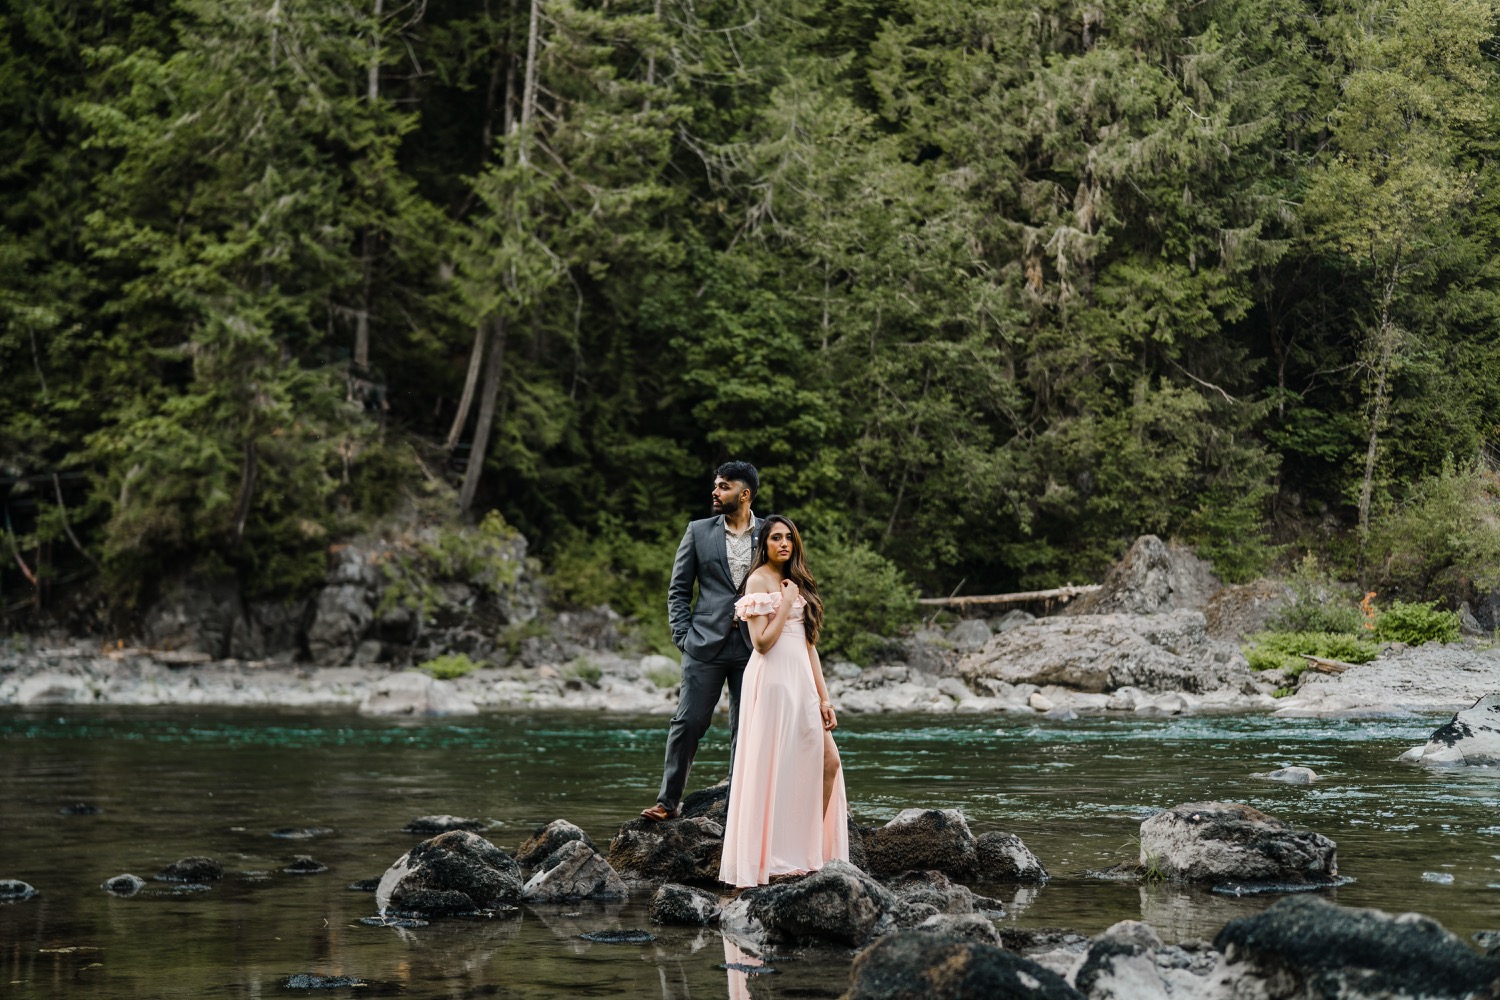 Couple standing on rocks in the river looking in opposite directions.